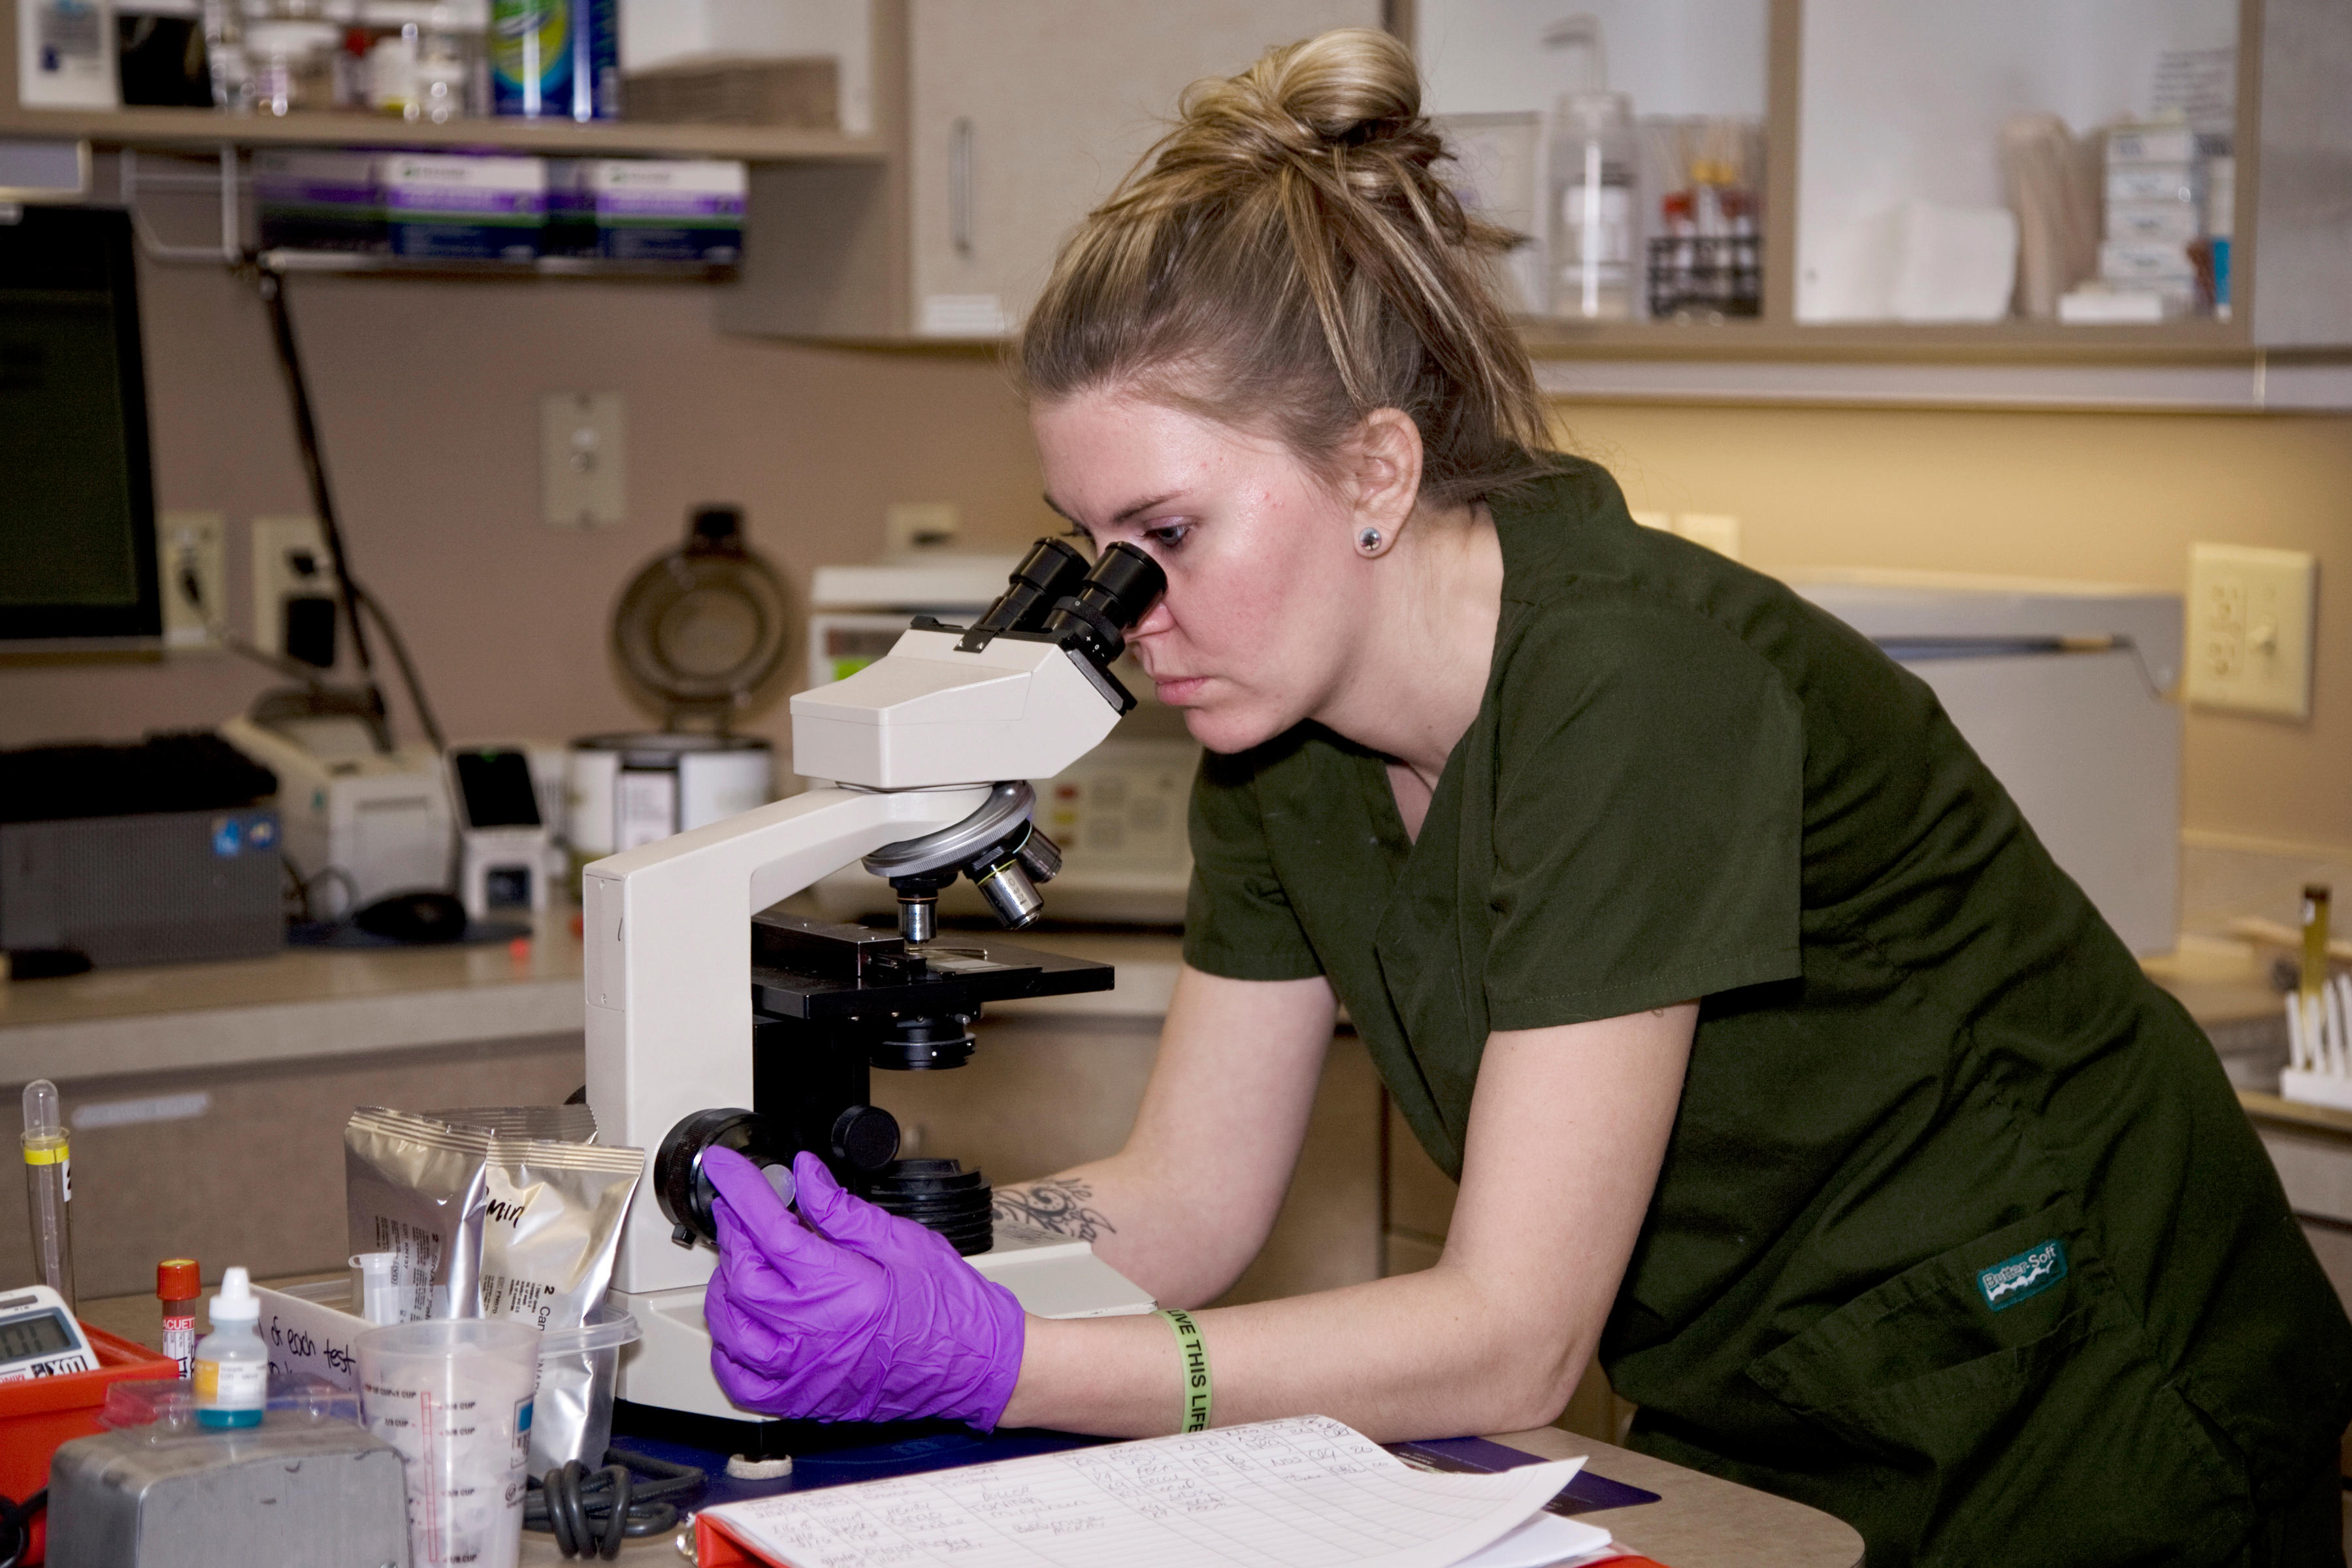 A veterinary technician examines a sample using a microscope in our on-site diagnostic laboratory. We are able to perform urinalysis, parasite testing, fungal cultures, blood work, and much more.